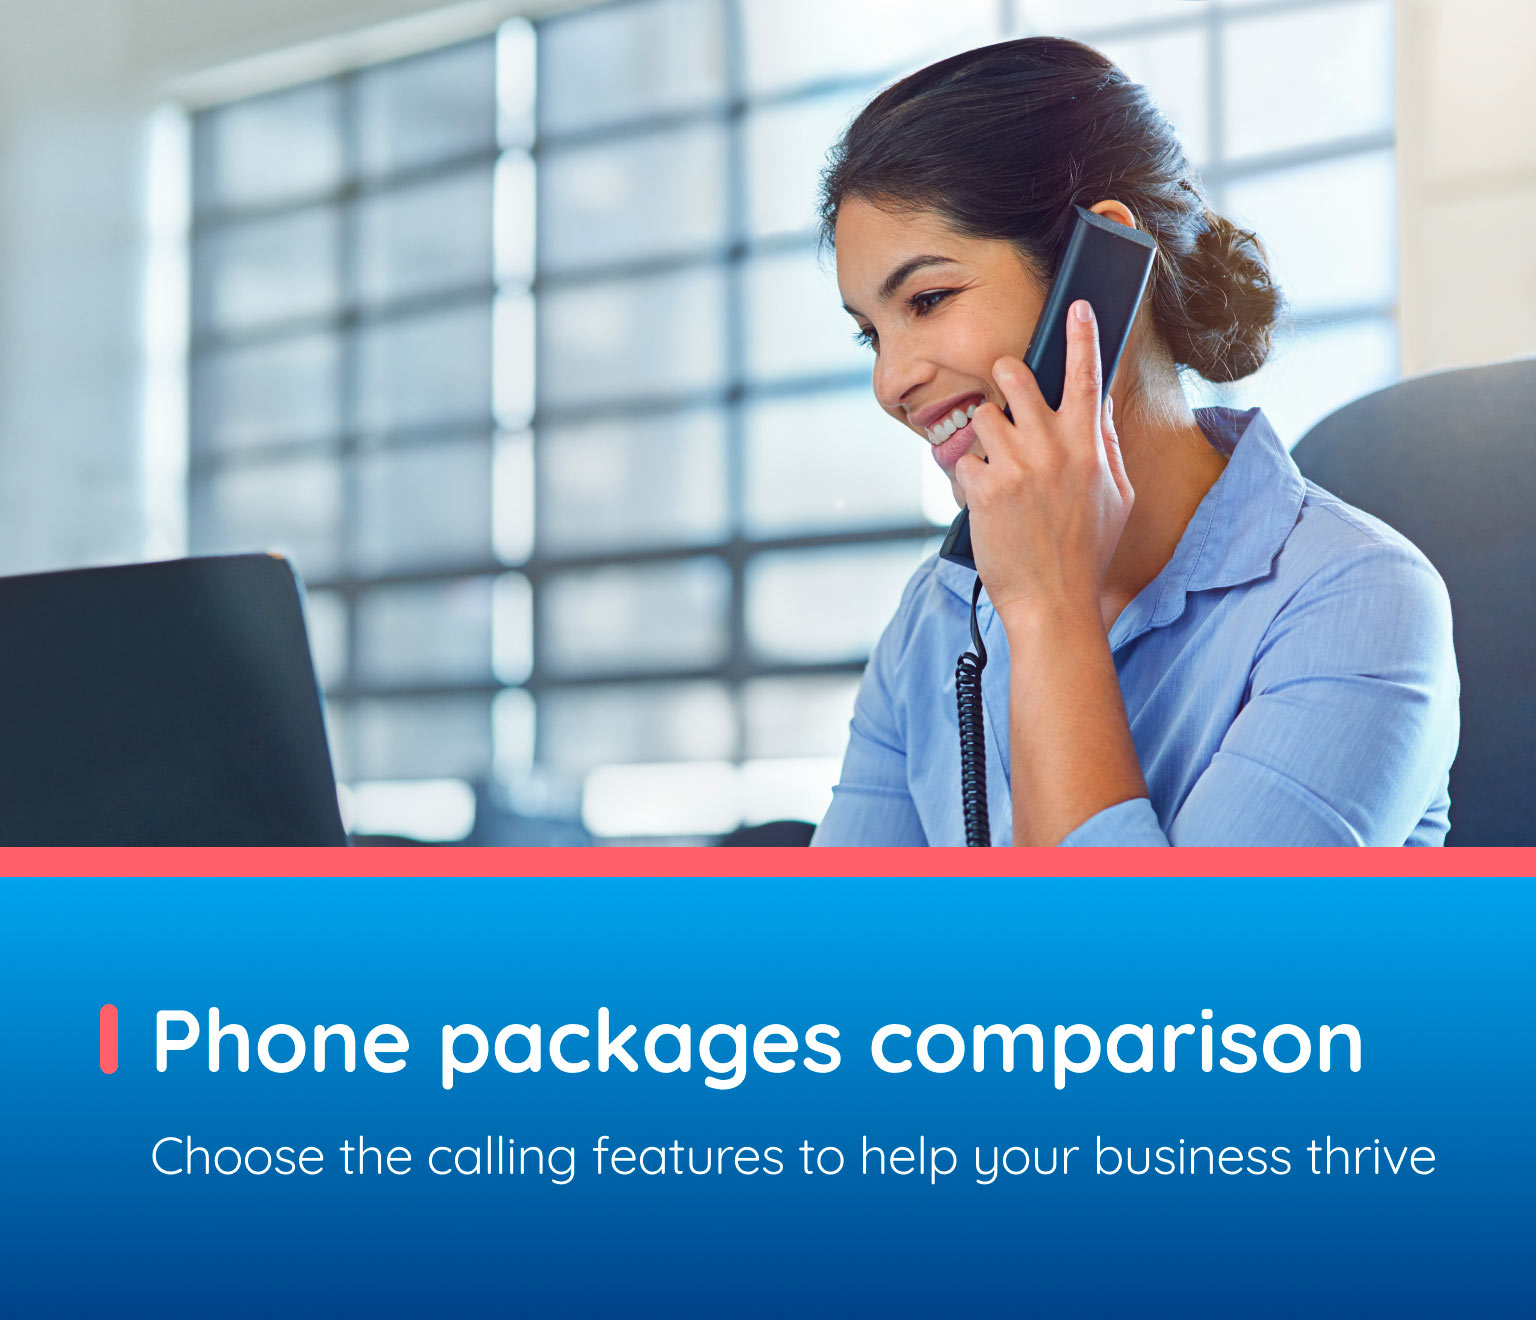 Explore our phone packages and find the right fit for your business.